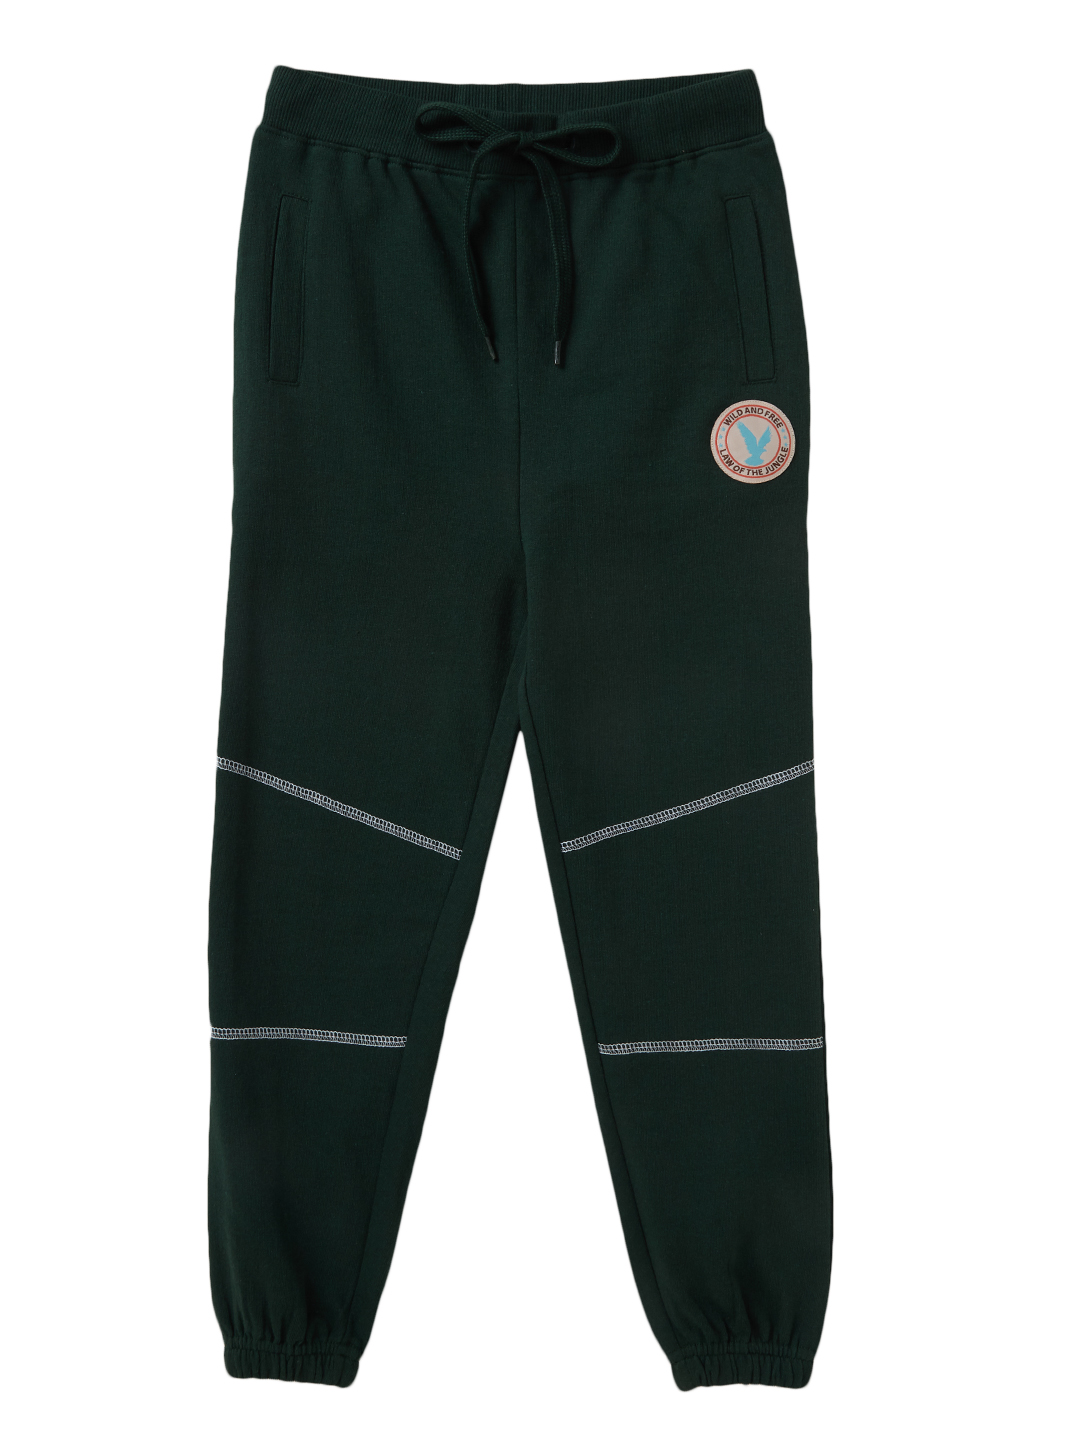 Boys Cotton Track Pant - Olive Green